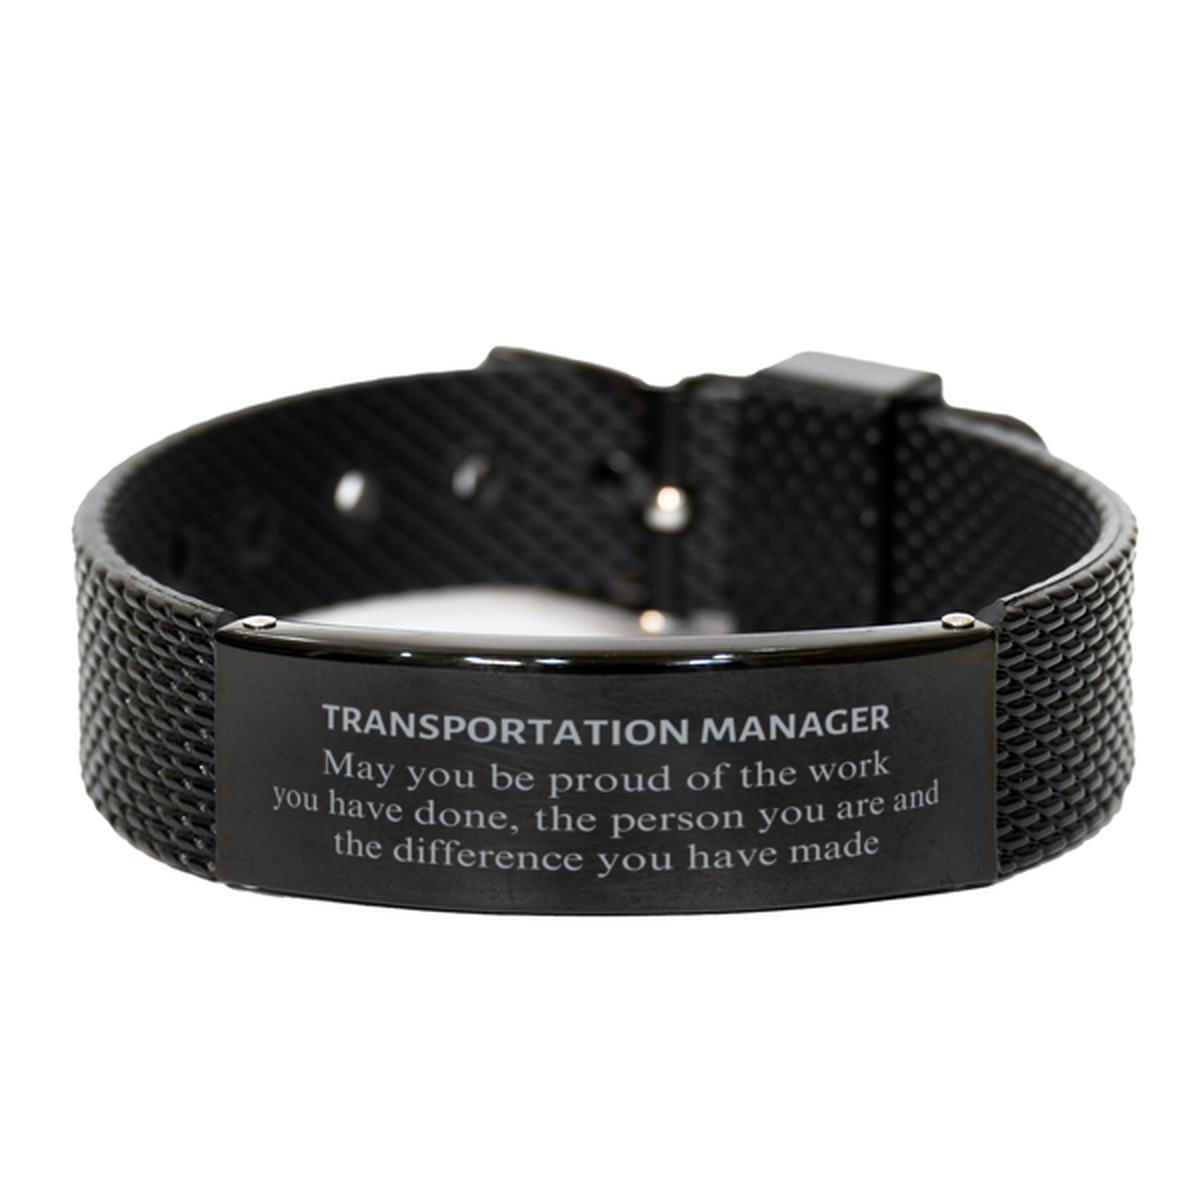 Transportation Manager May you be proud of the work you have done, Retirement Transportation Manager Black Shark Mesh Bracelet for Colleague Appreciation Gifts Amazing for Transportation Manager